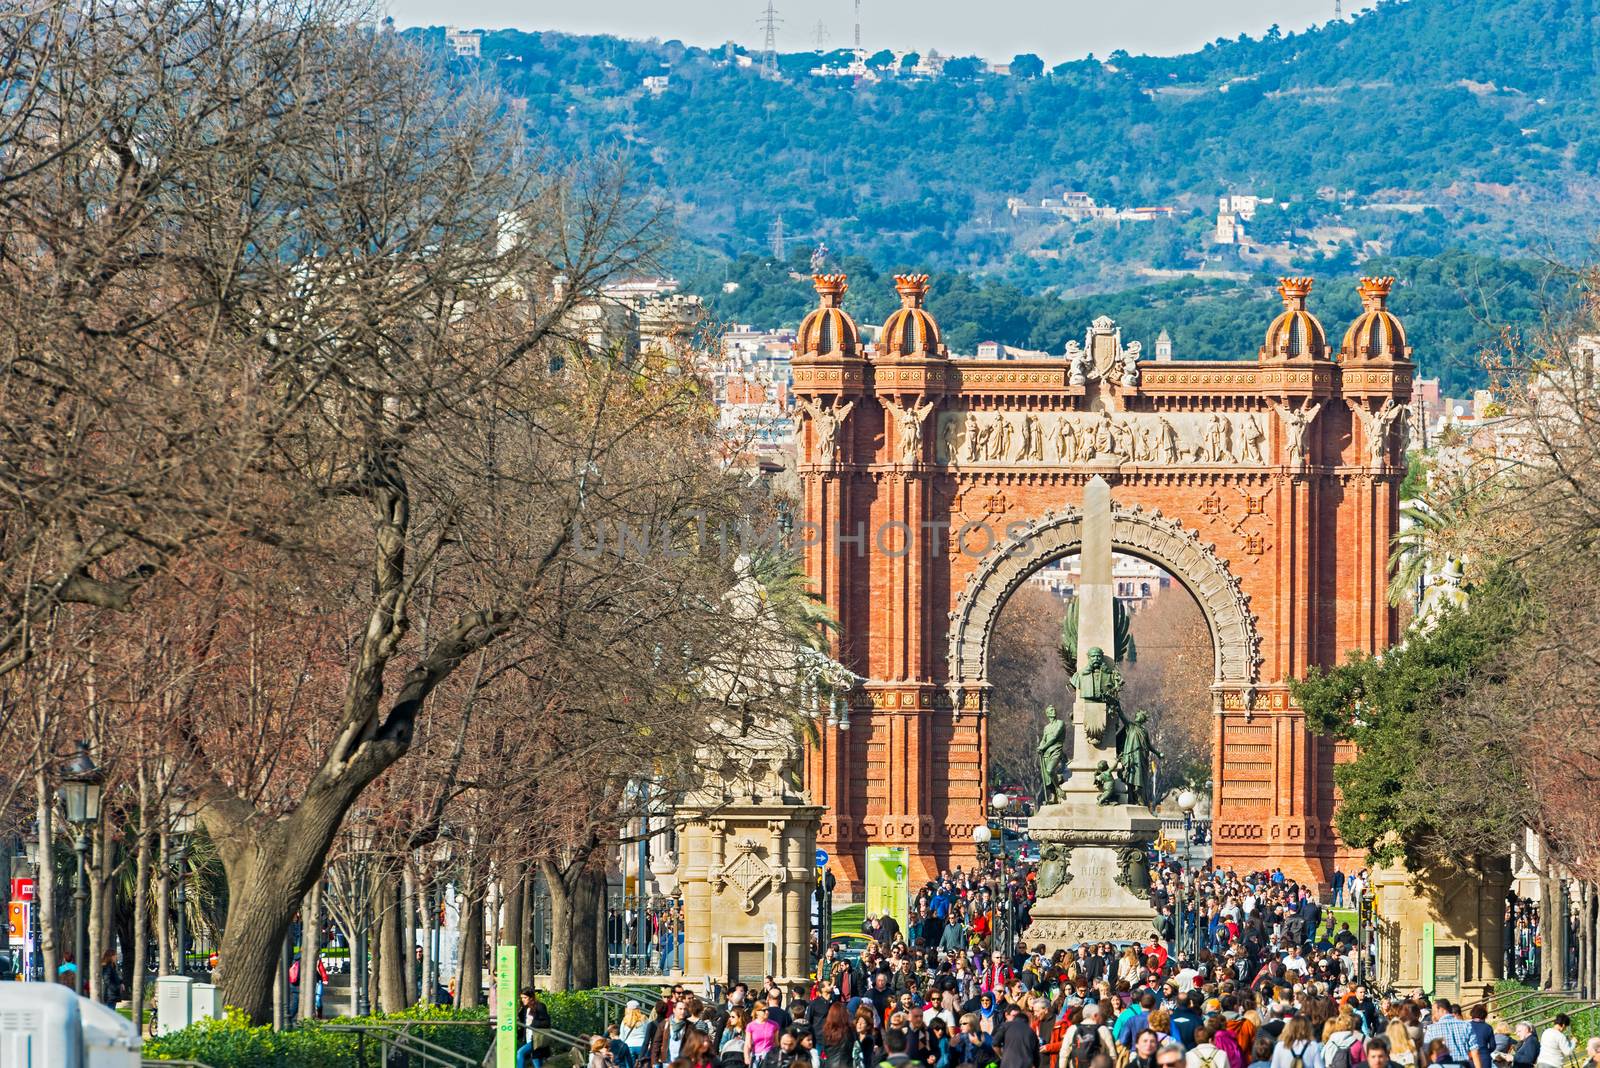 Barcelona, Spain - January 26, 2014: The Arc de Triumph in Barcelona, Spain was build in 1888 for Universal Exposition. The Arch served as  its archway to the exhibition. People walking by on a sunny day in January 26, 2014